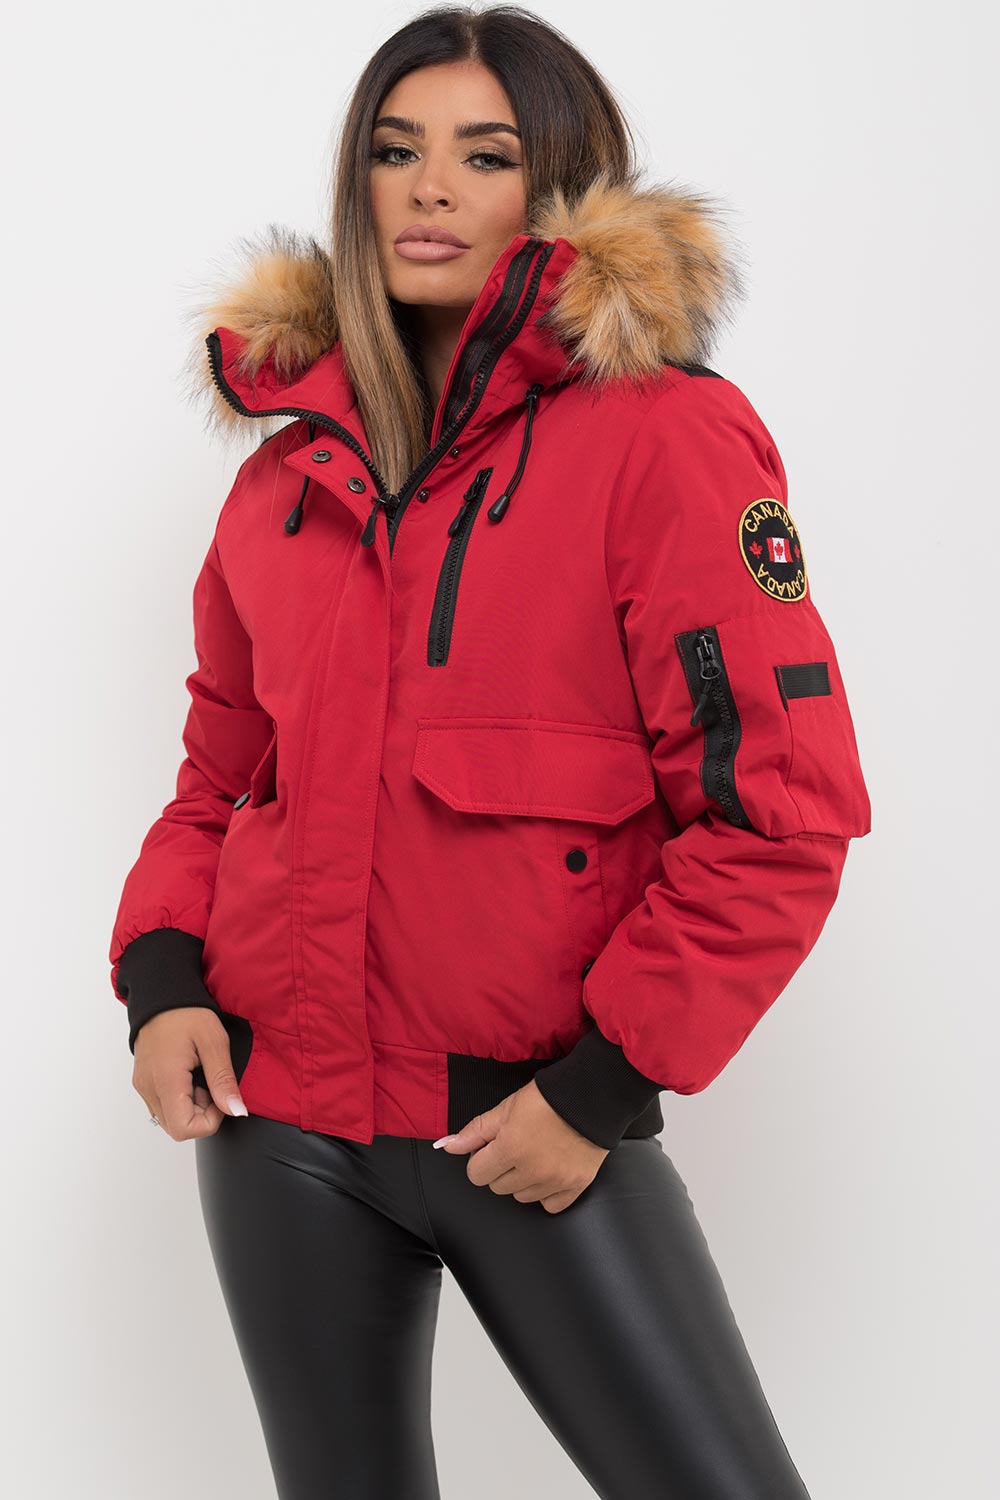 Women's Bomber Jacket With Fur Hood Red Canada Goose Inspired ...